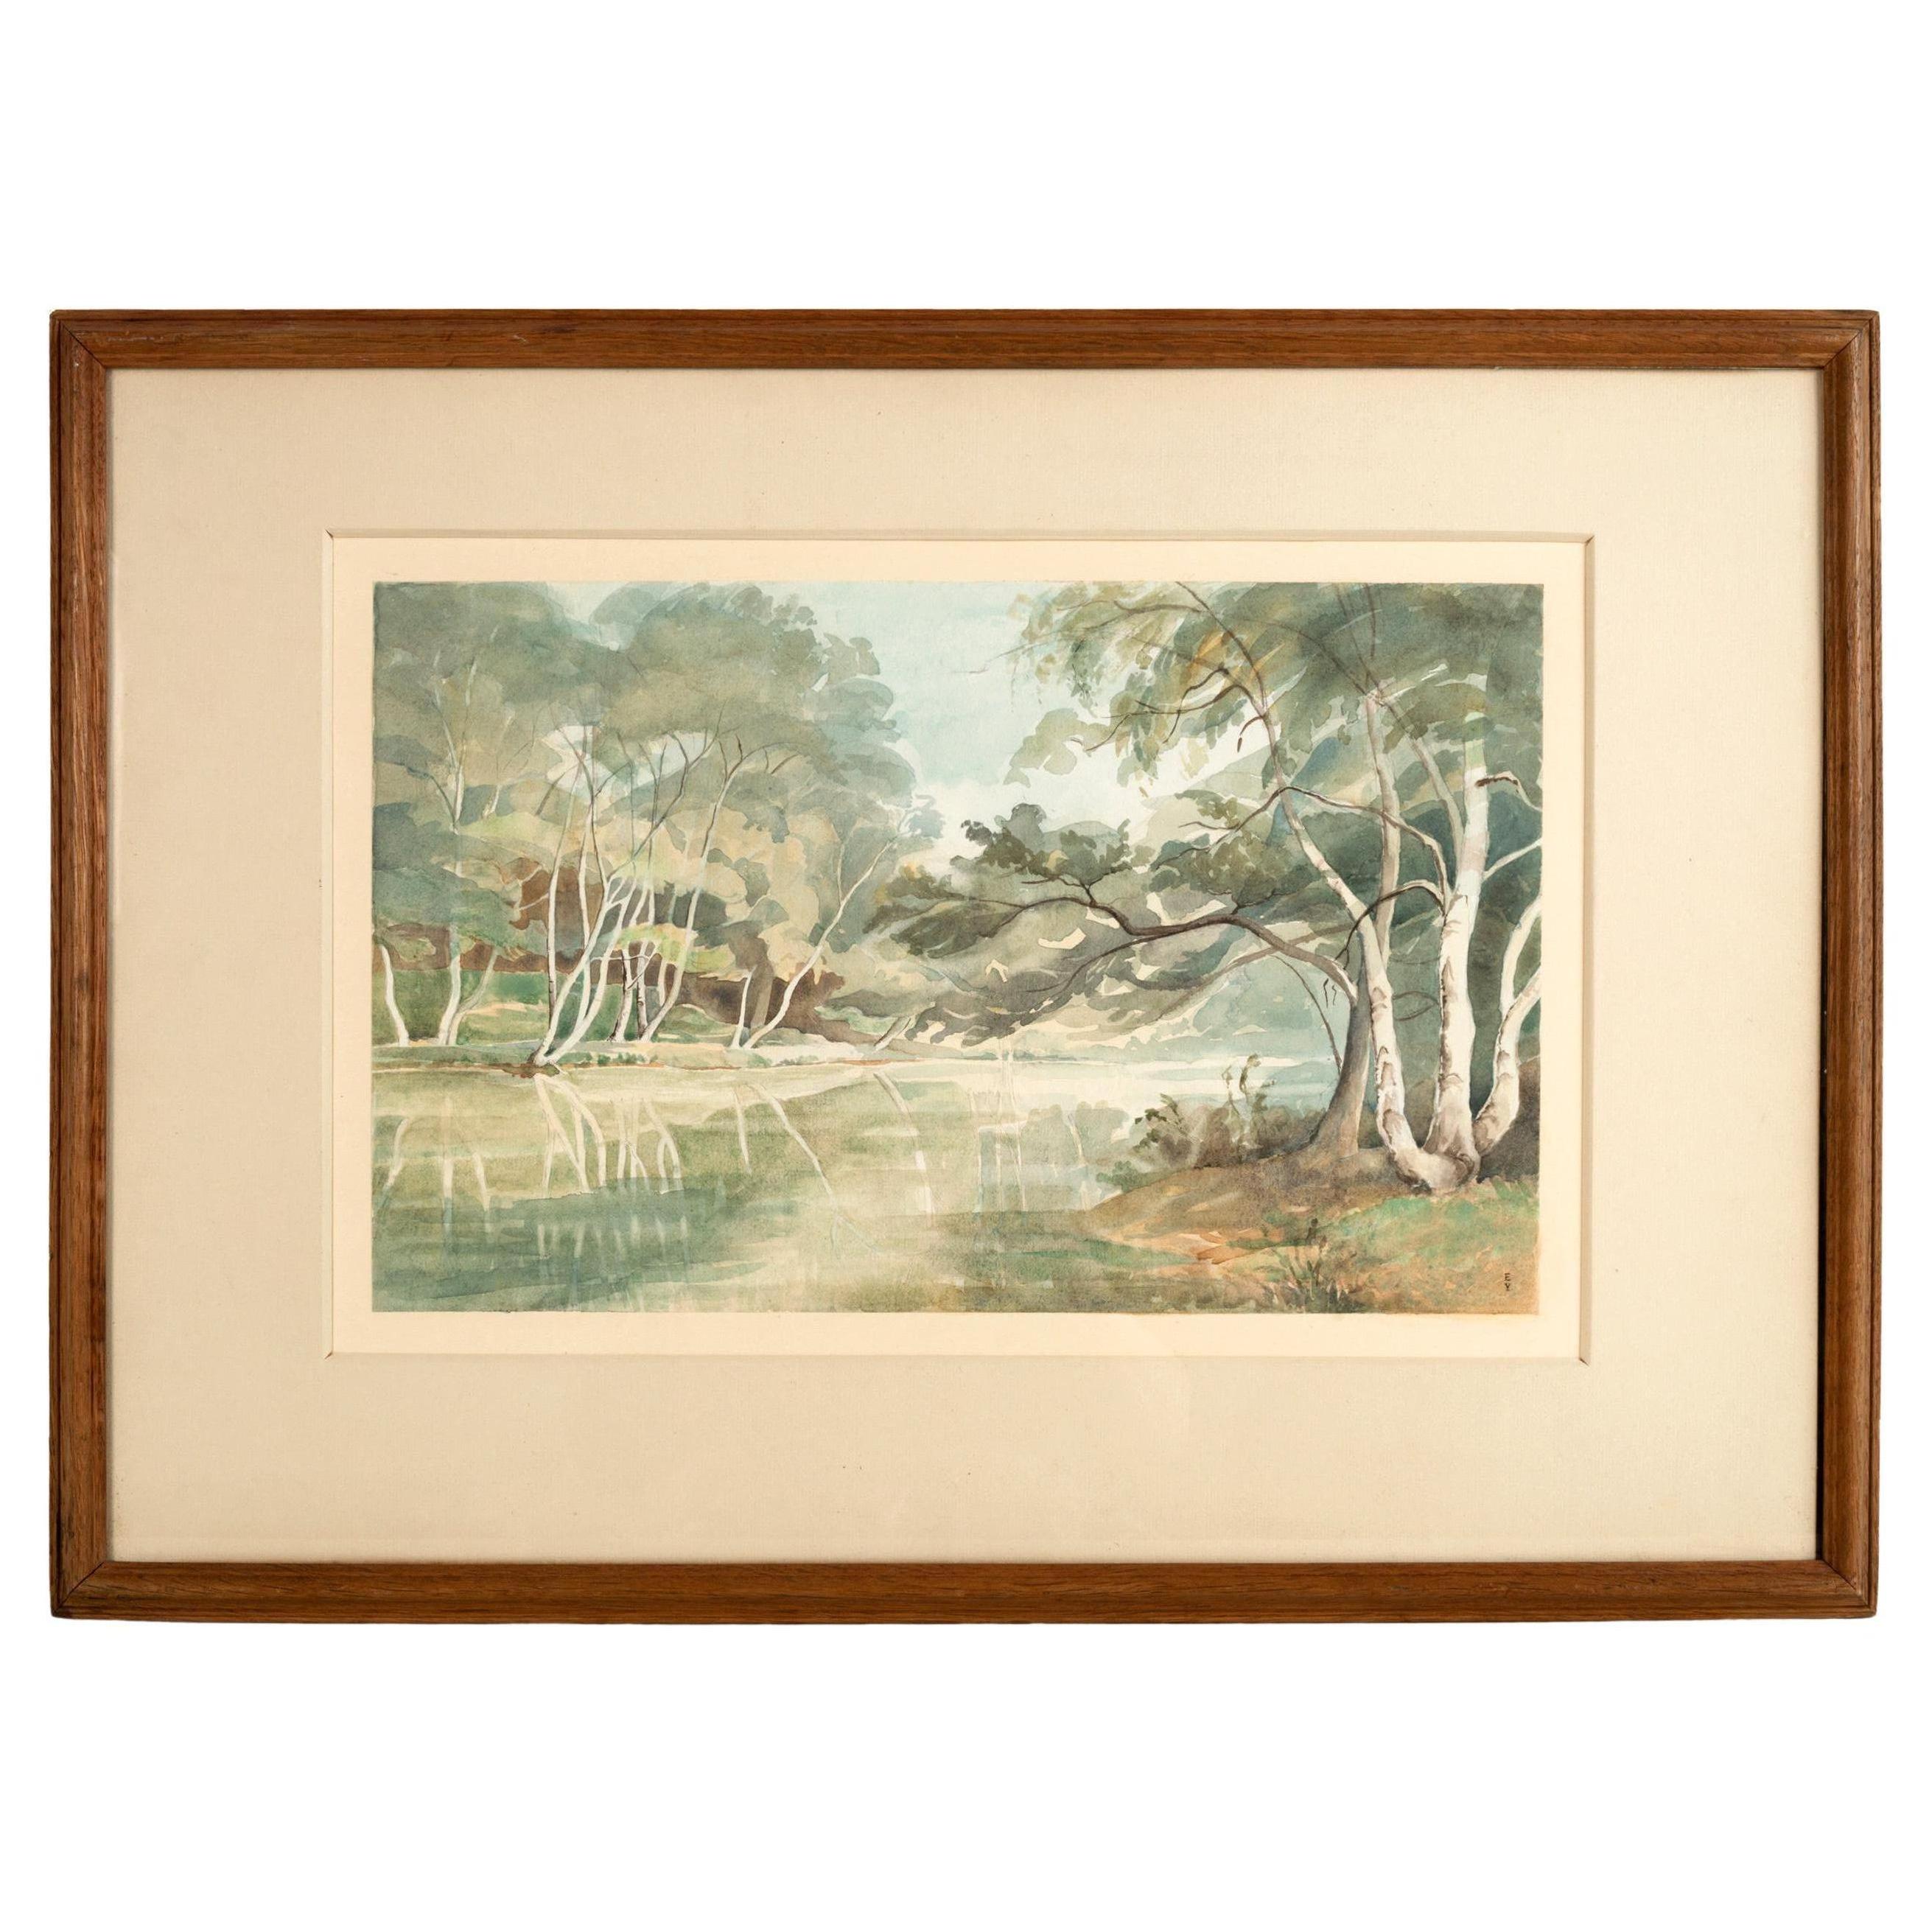 'Wooded Landscape' Watercolour by English Artist Signed Eileen Young